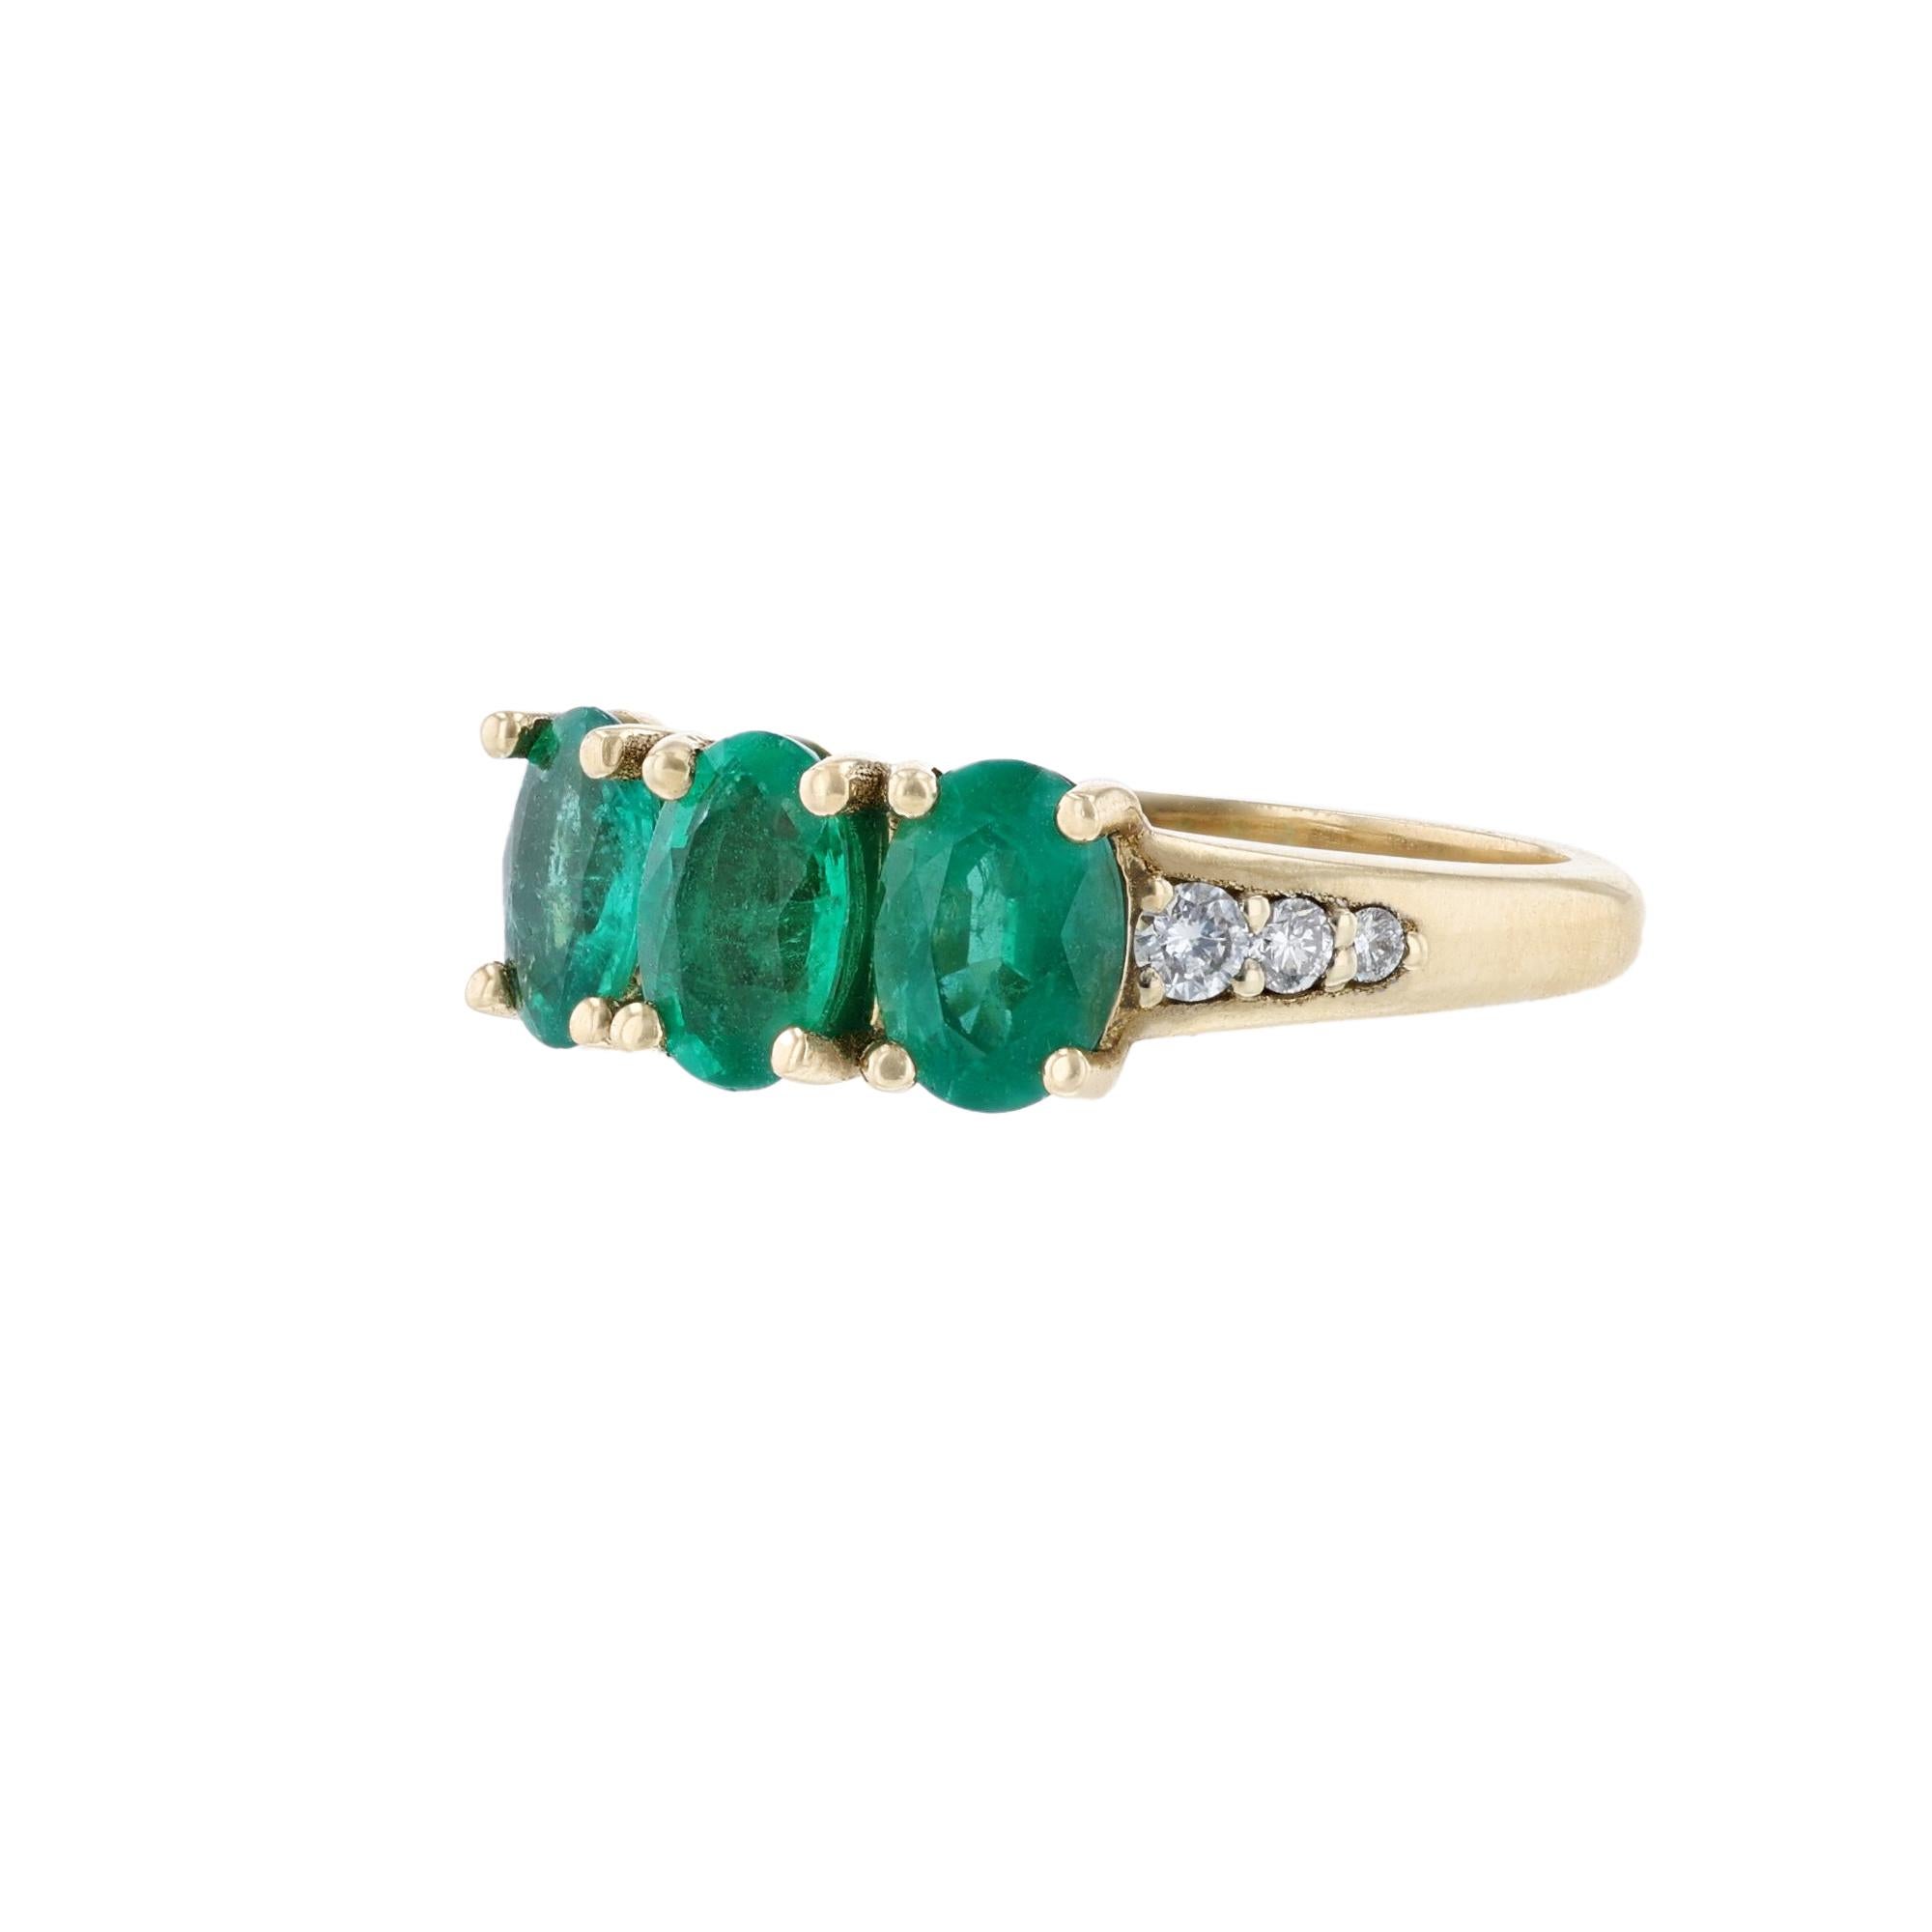 This ring is made in 14k yellow gold featuring 3 oval cut, prong set emeralds weighing 1.70 carats and 6 round cut diamonds weighing 0.16 carat. With a color grade (H) and clarity grade (SI2).